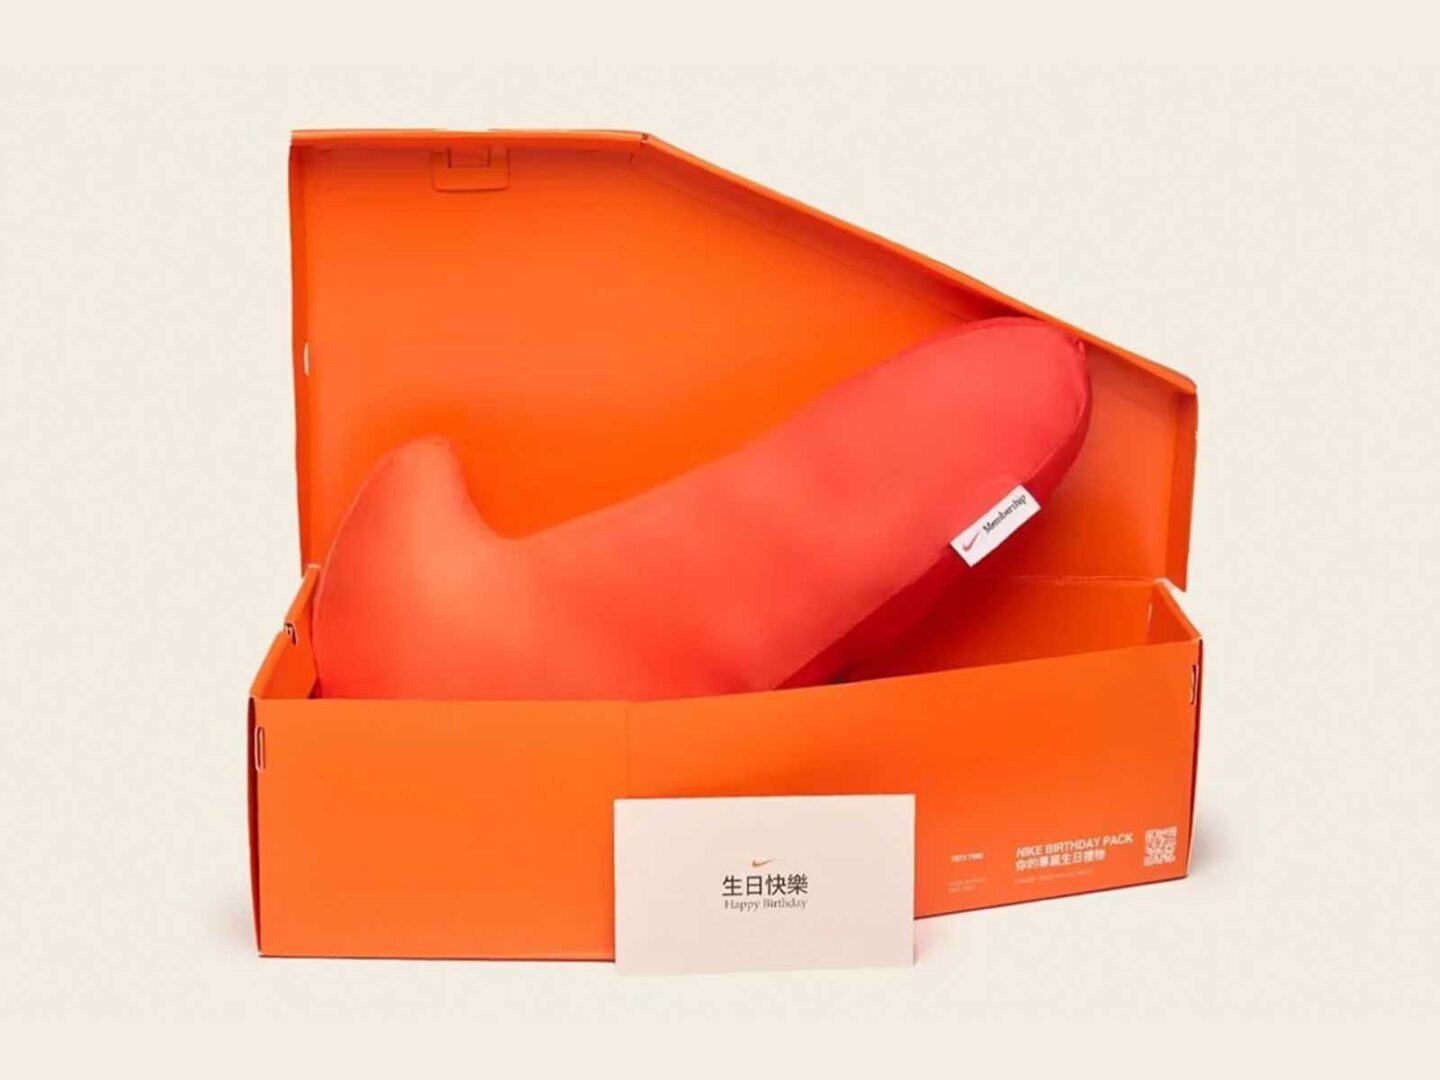 Nike gives you a swoosh-shaped pillow for your birthday